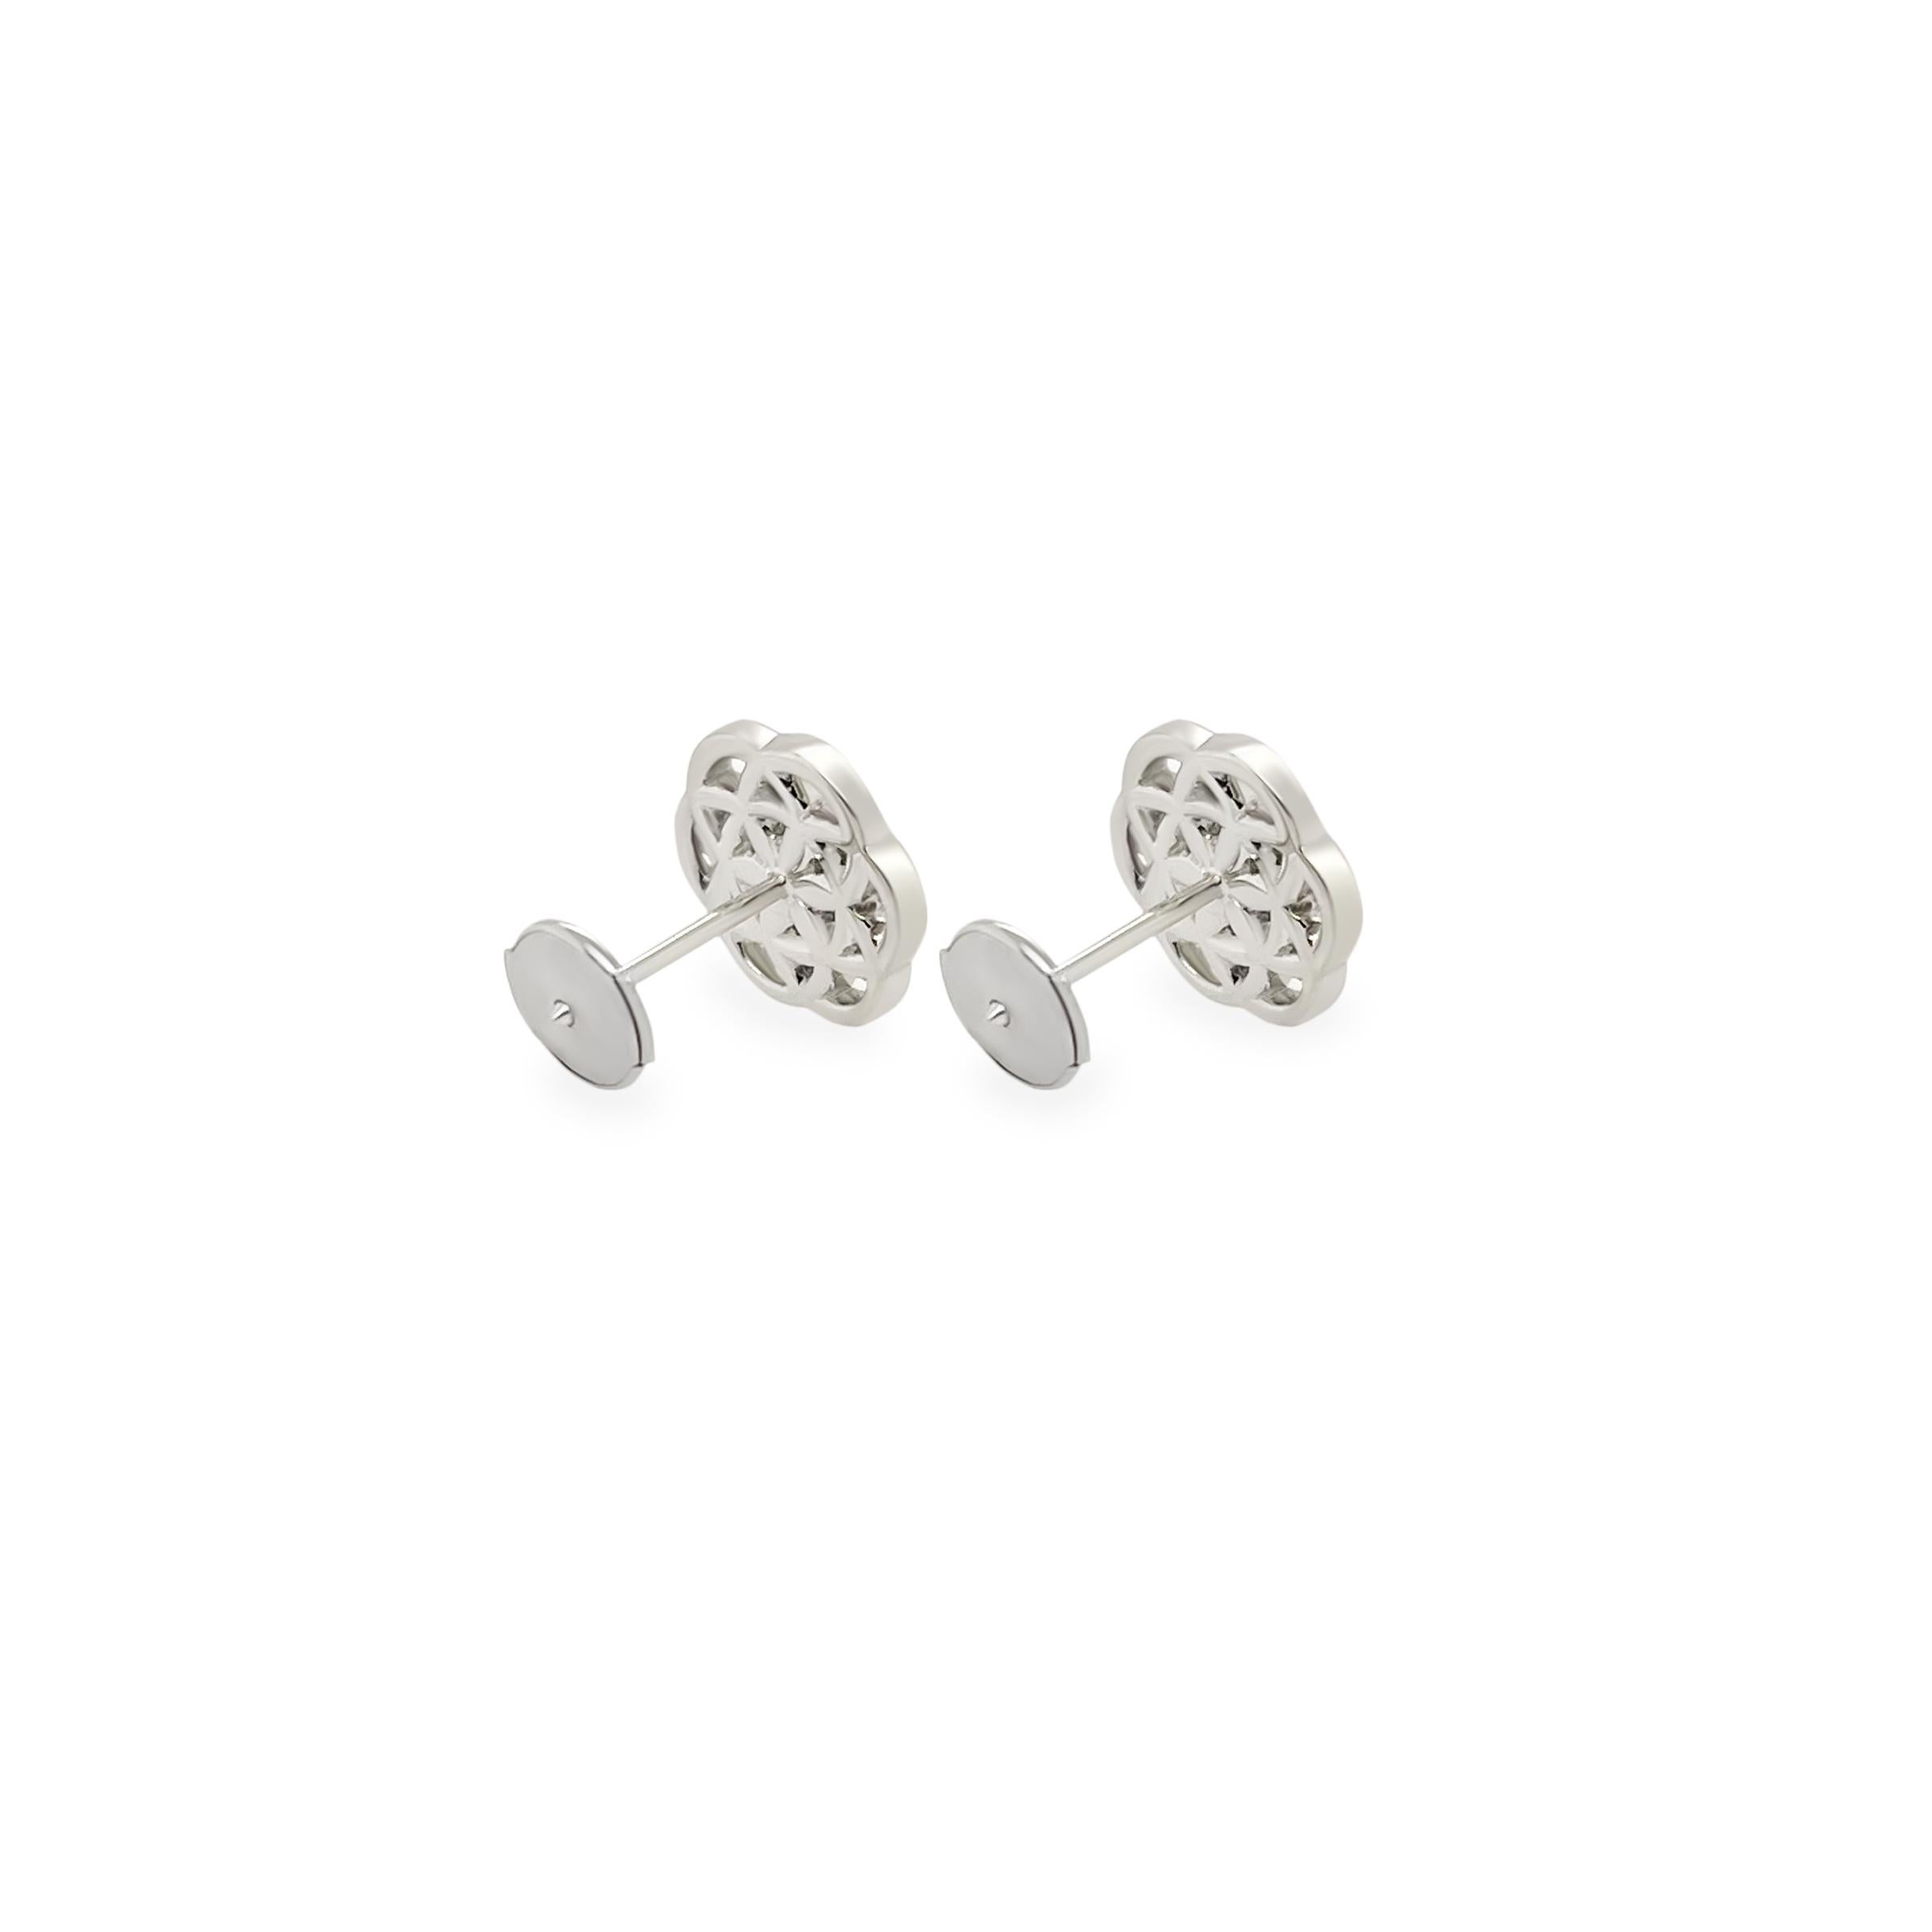 Our Flower of Life Earrings are expertly crafted from shimmering 18k white gold and high quality diamonds. This intricate design captures the essence of interconnectedness and is a symbol of harmony for all living things with micro pave'd diamonds.